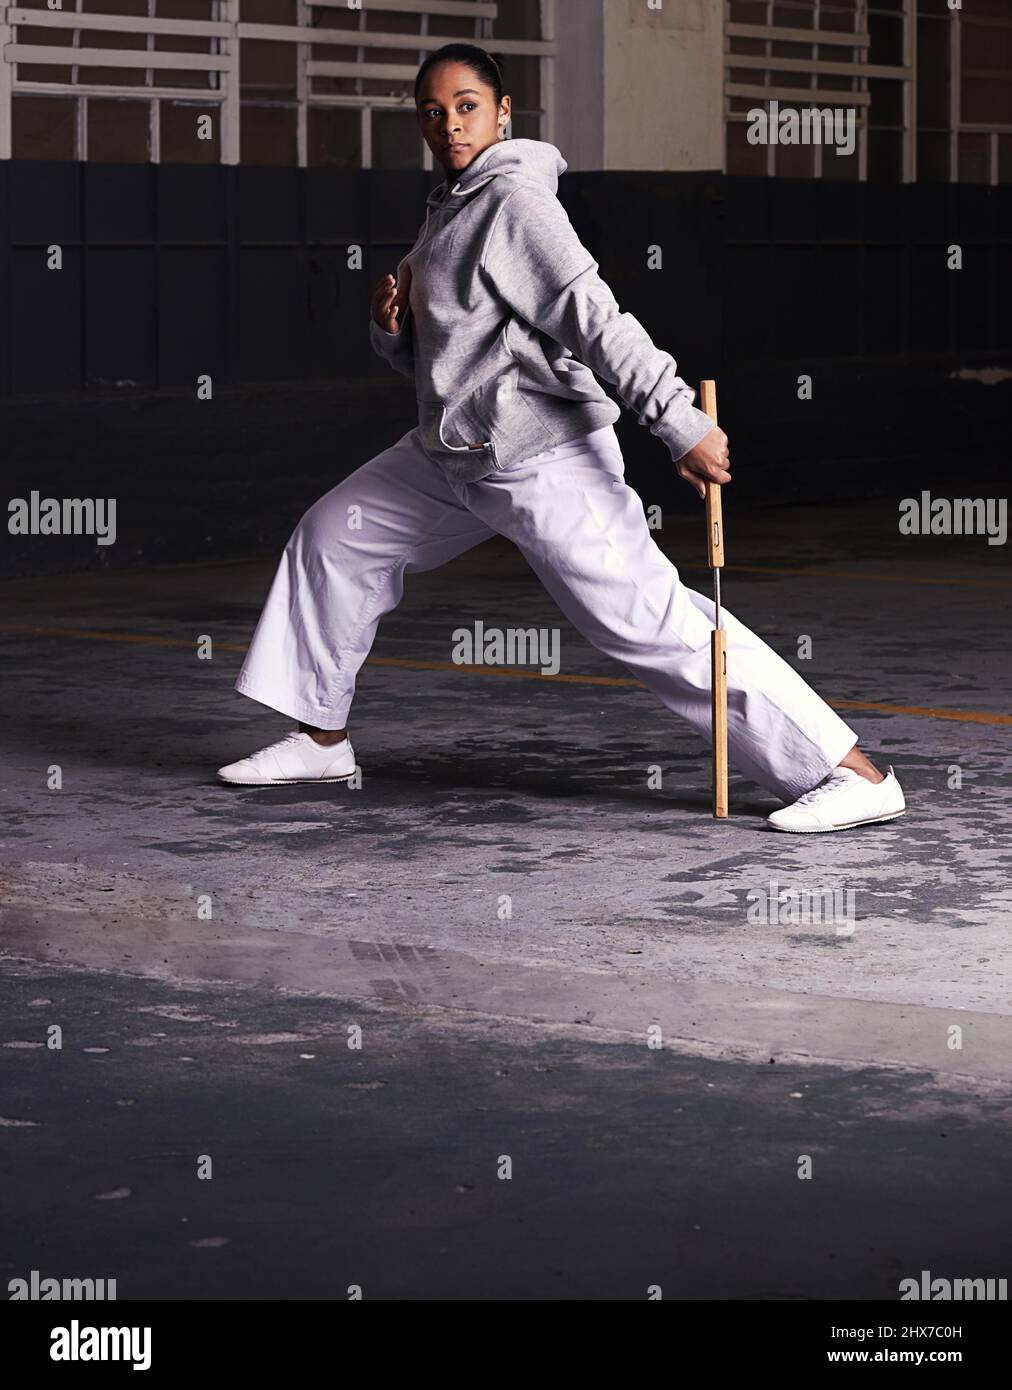 The heart of a fighter. Shot of a young woman practicing martial arts. Stock Photo